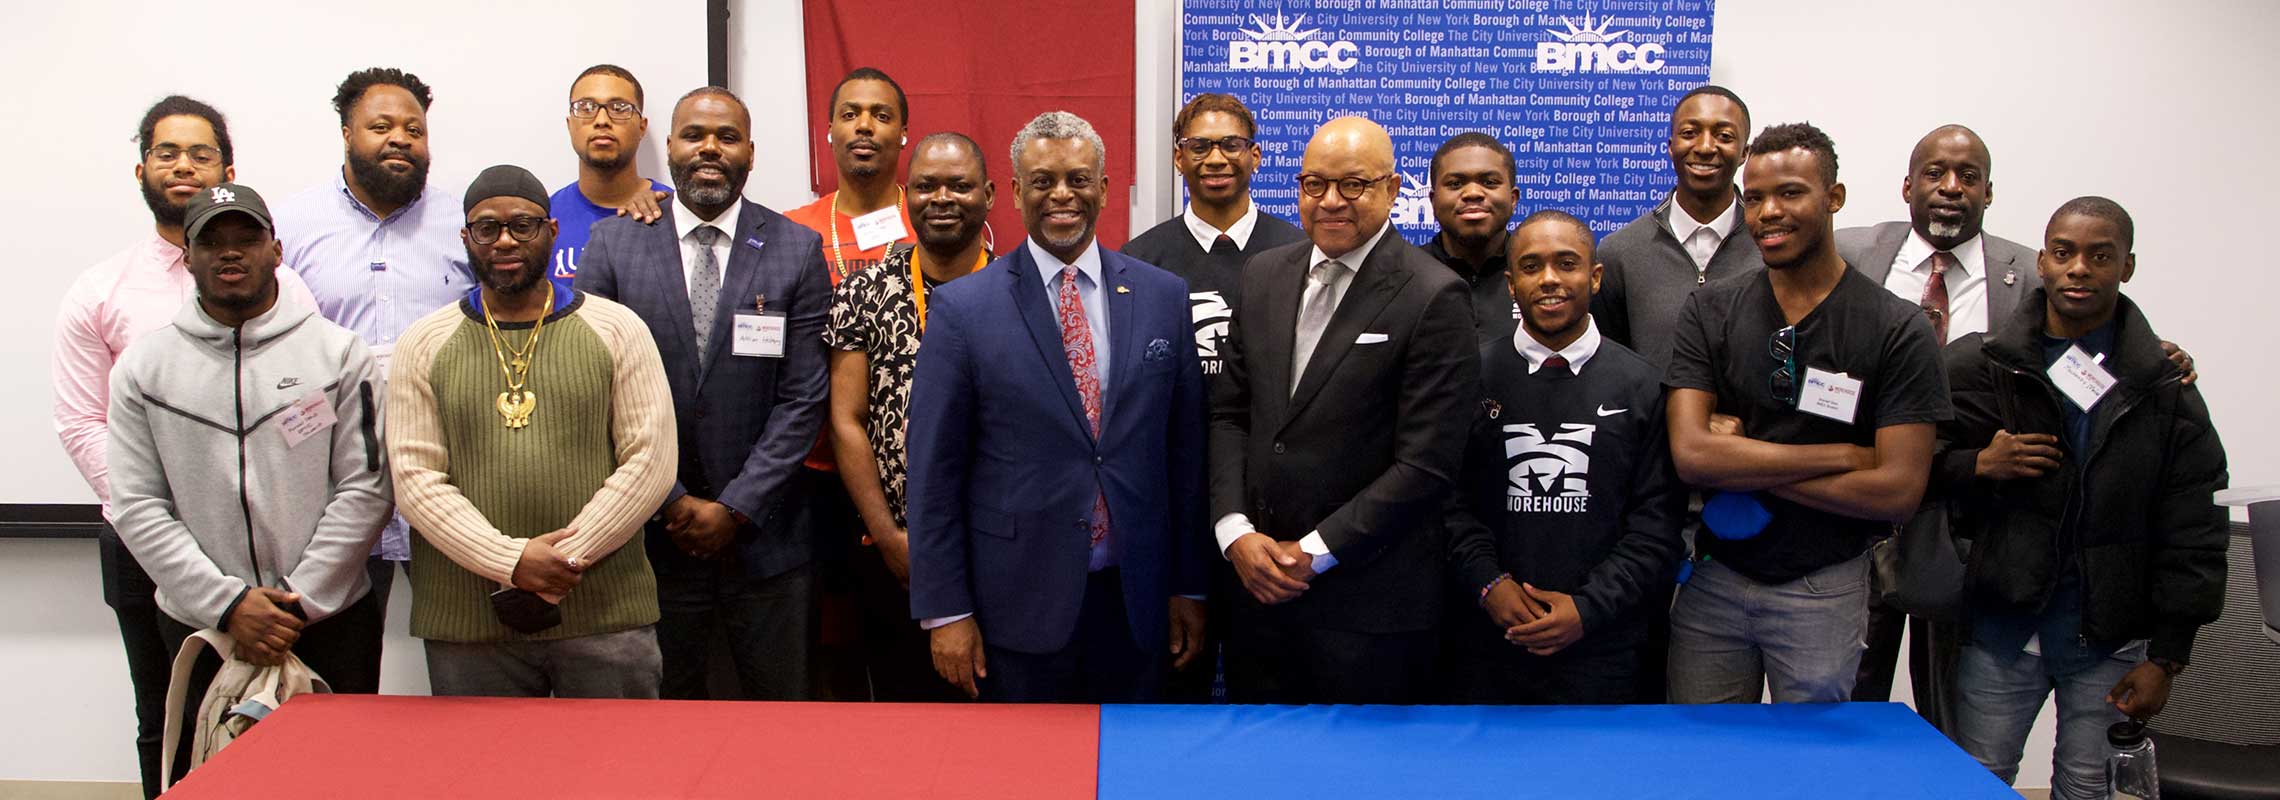 BMCC and Morehouse administrators and students at signing table